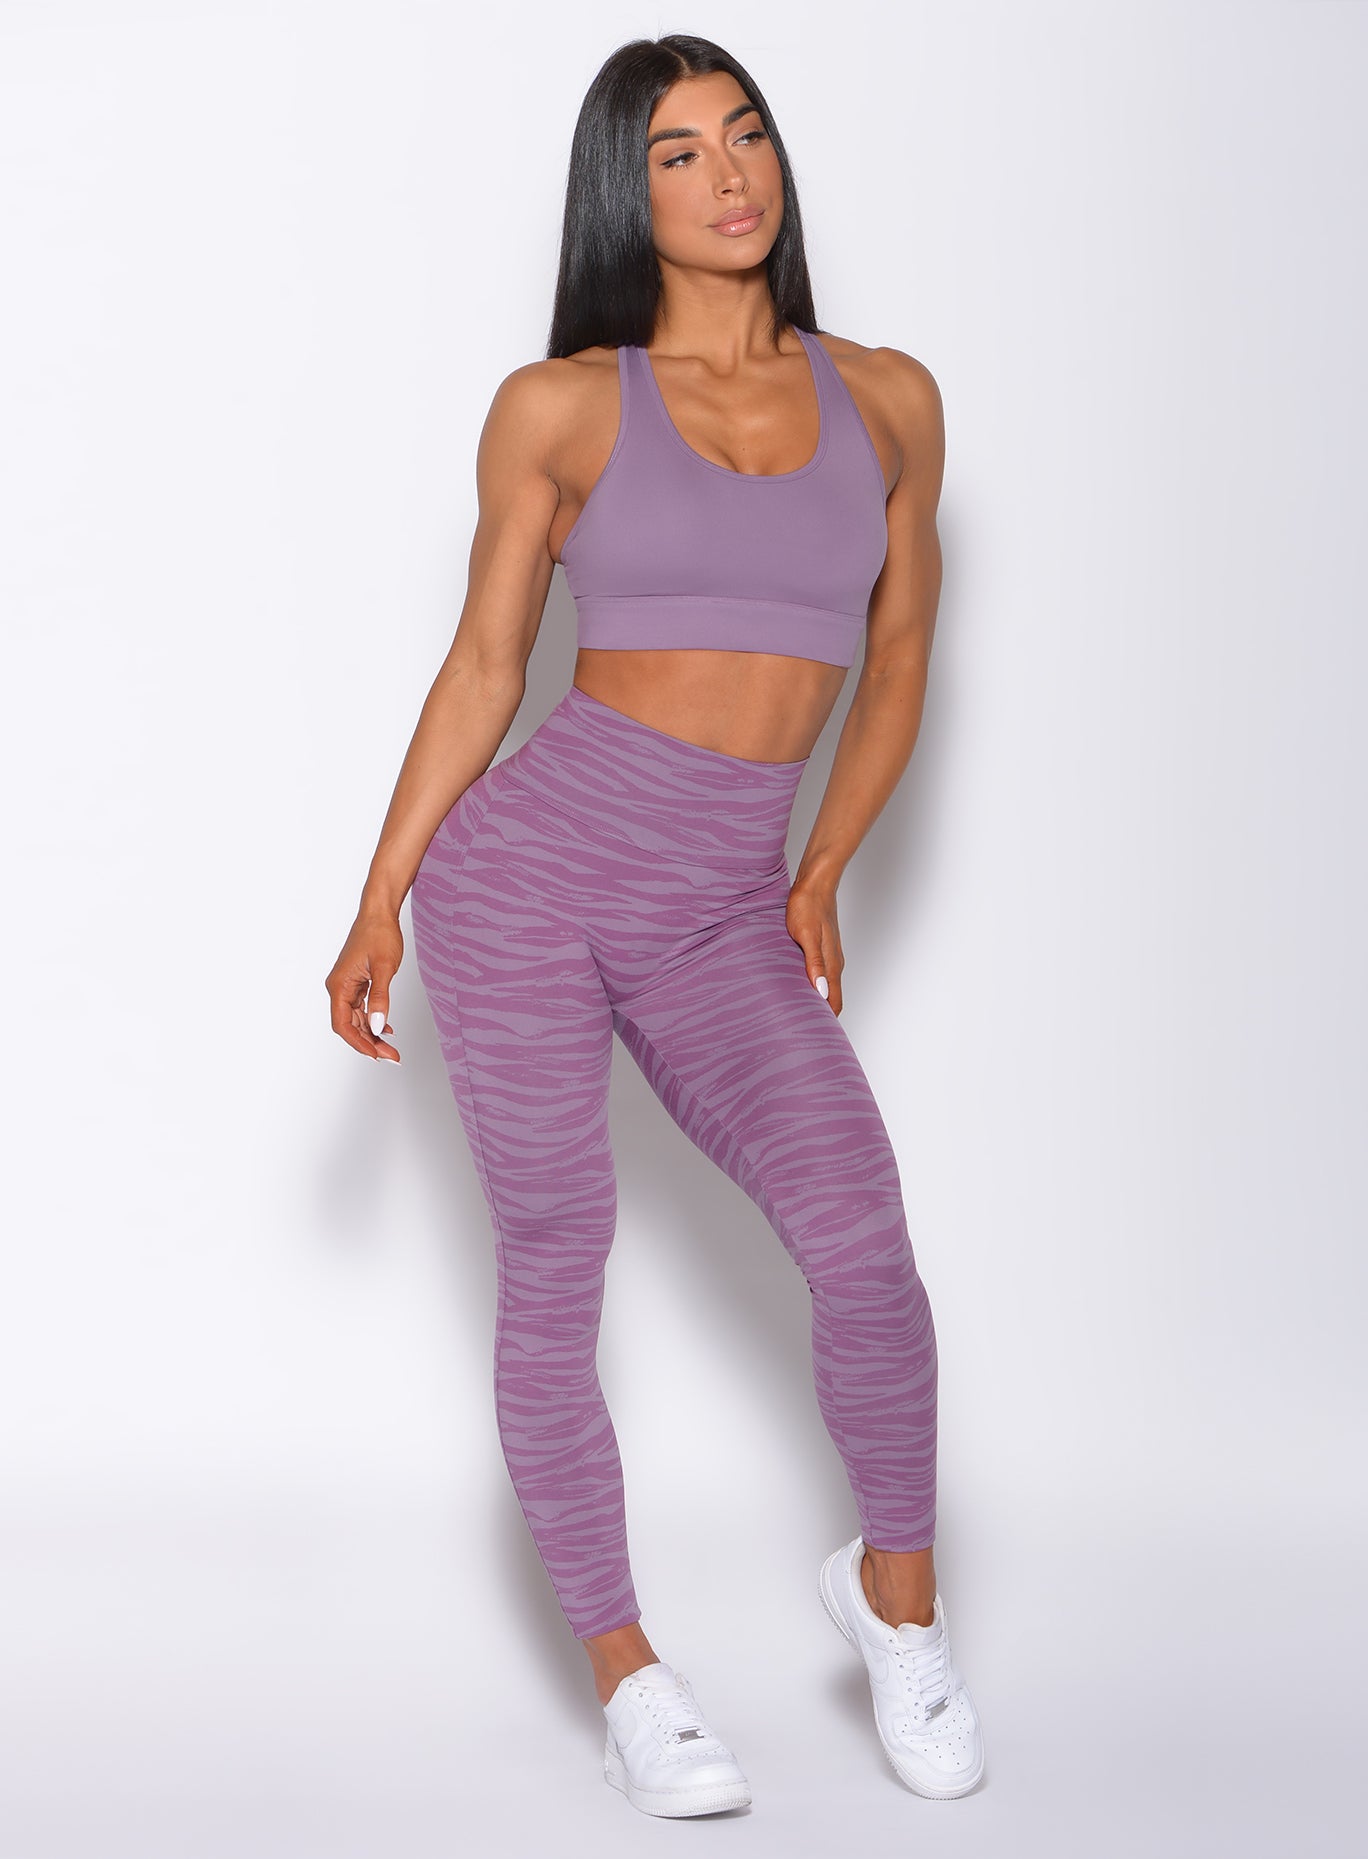 Front profile view of a model facing to her left wearing our sexy back legging in orchid purple color and a matching bra